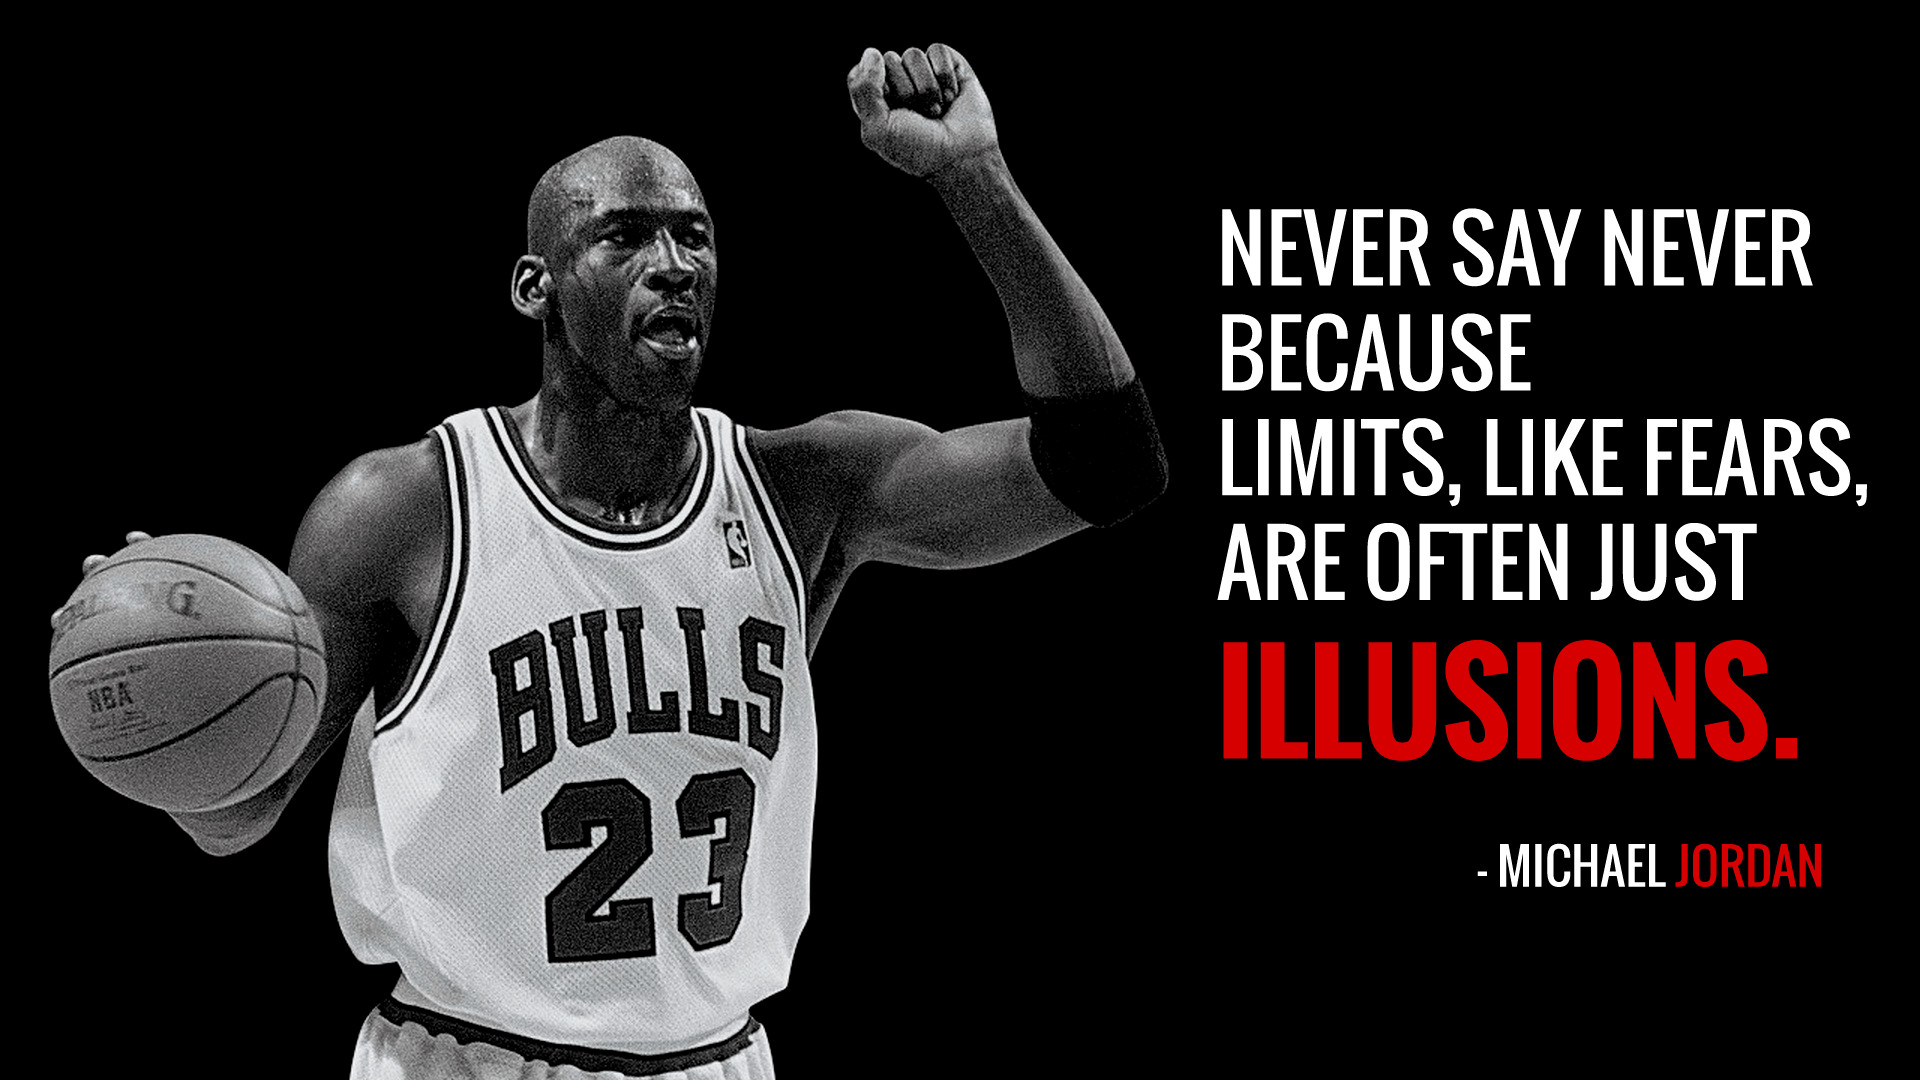 Sports Leadership Quotes
 25 All Time Best Inspirational Sports Quotes To Get You Going